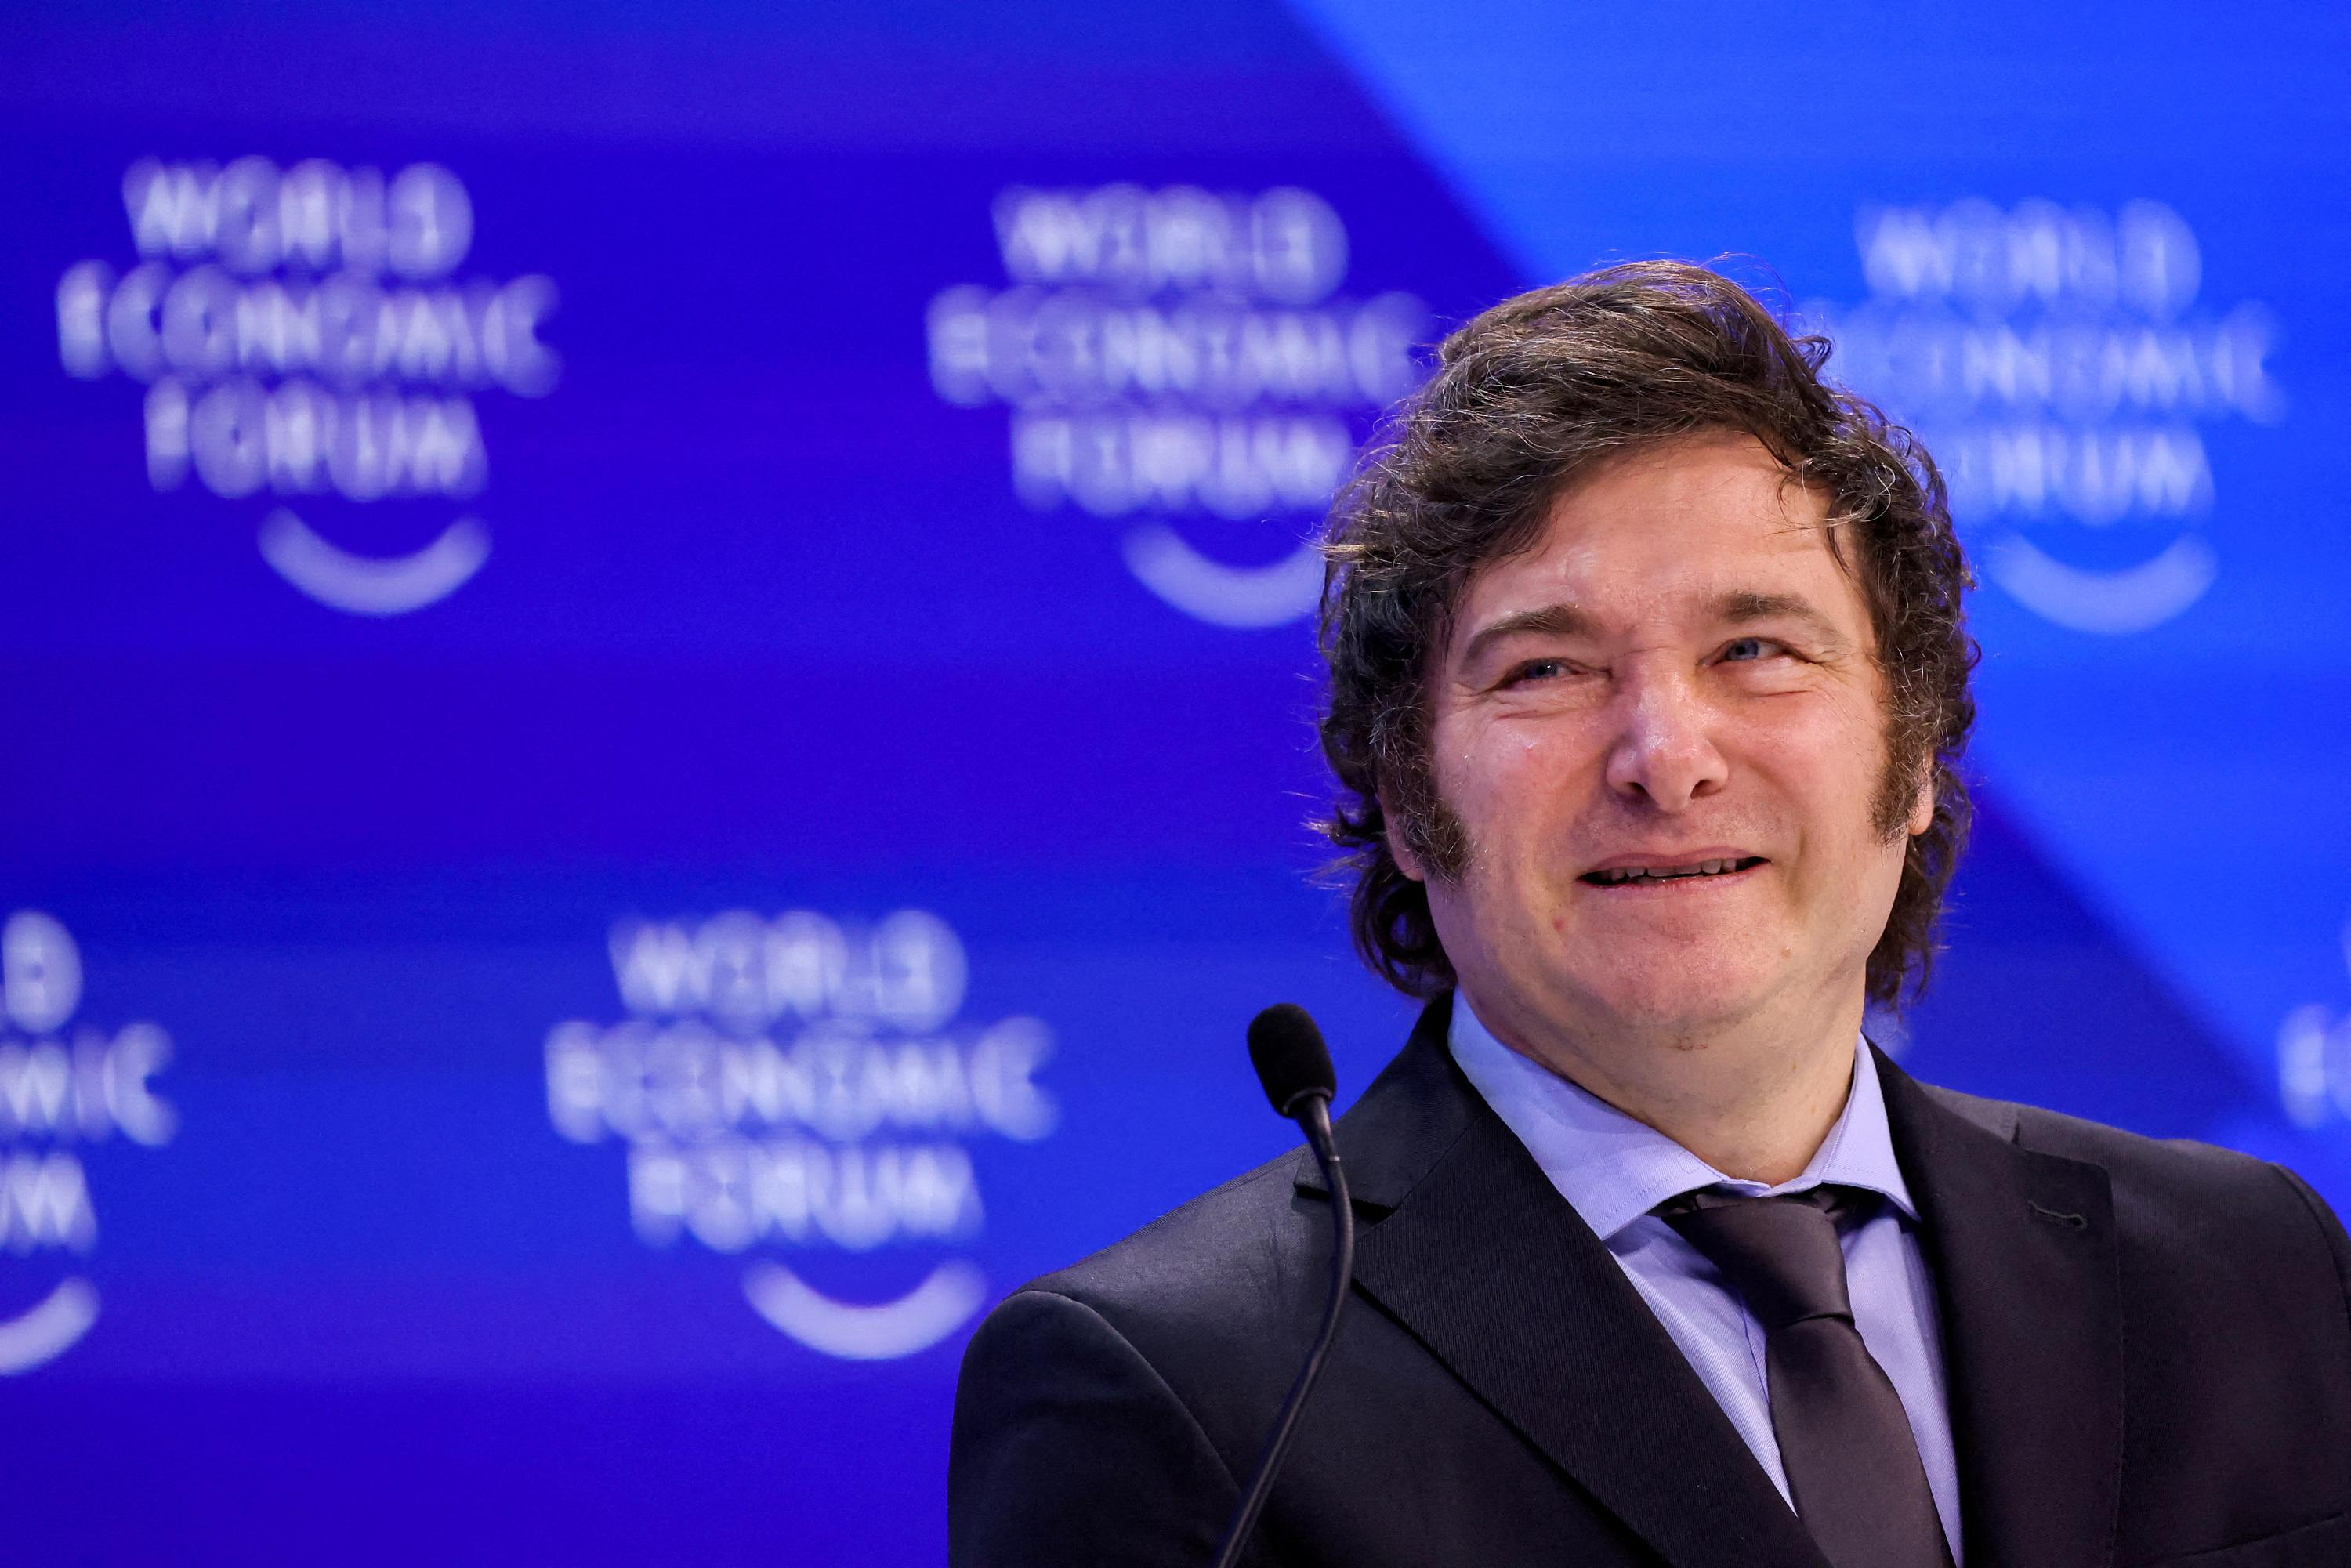 In Argentina, Javier Milei takes “bold” economic measures according to the IMF